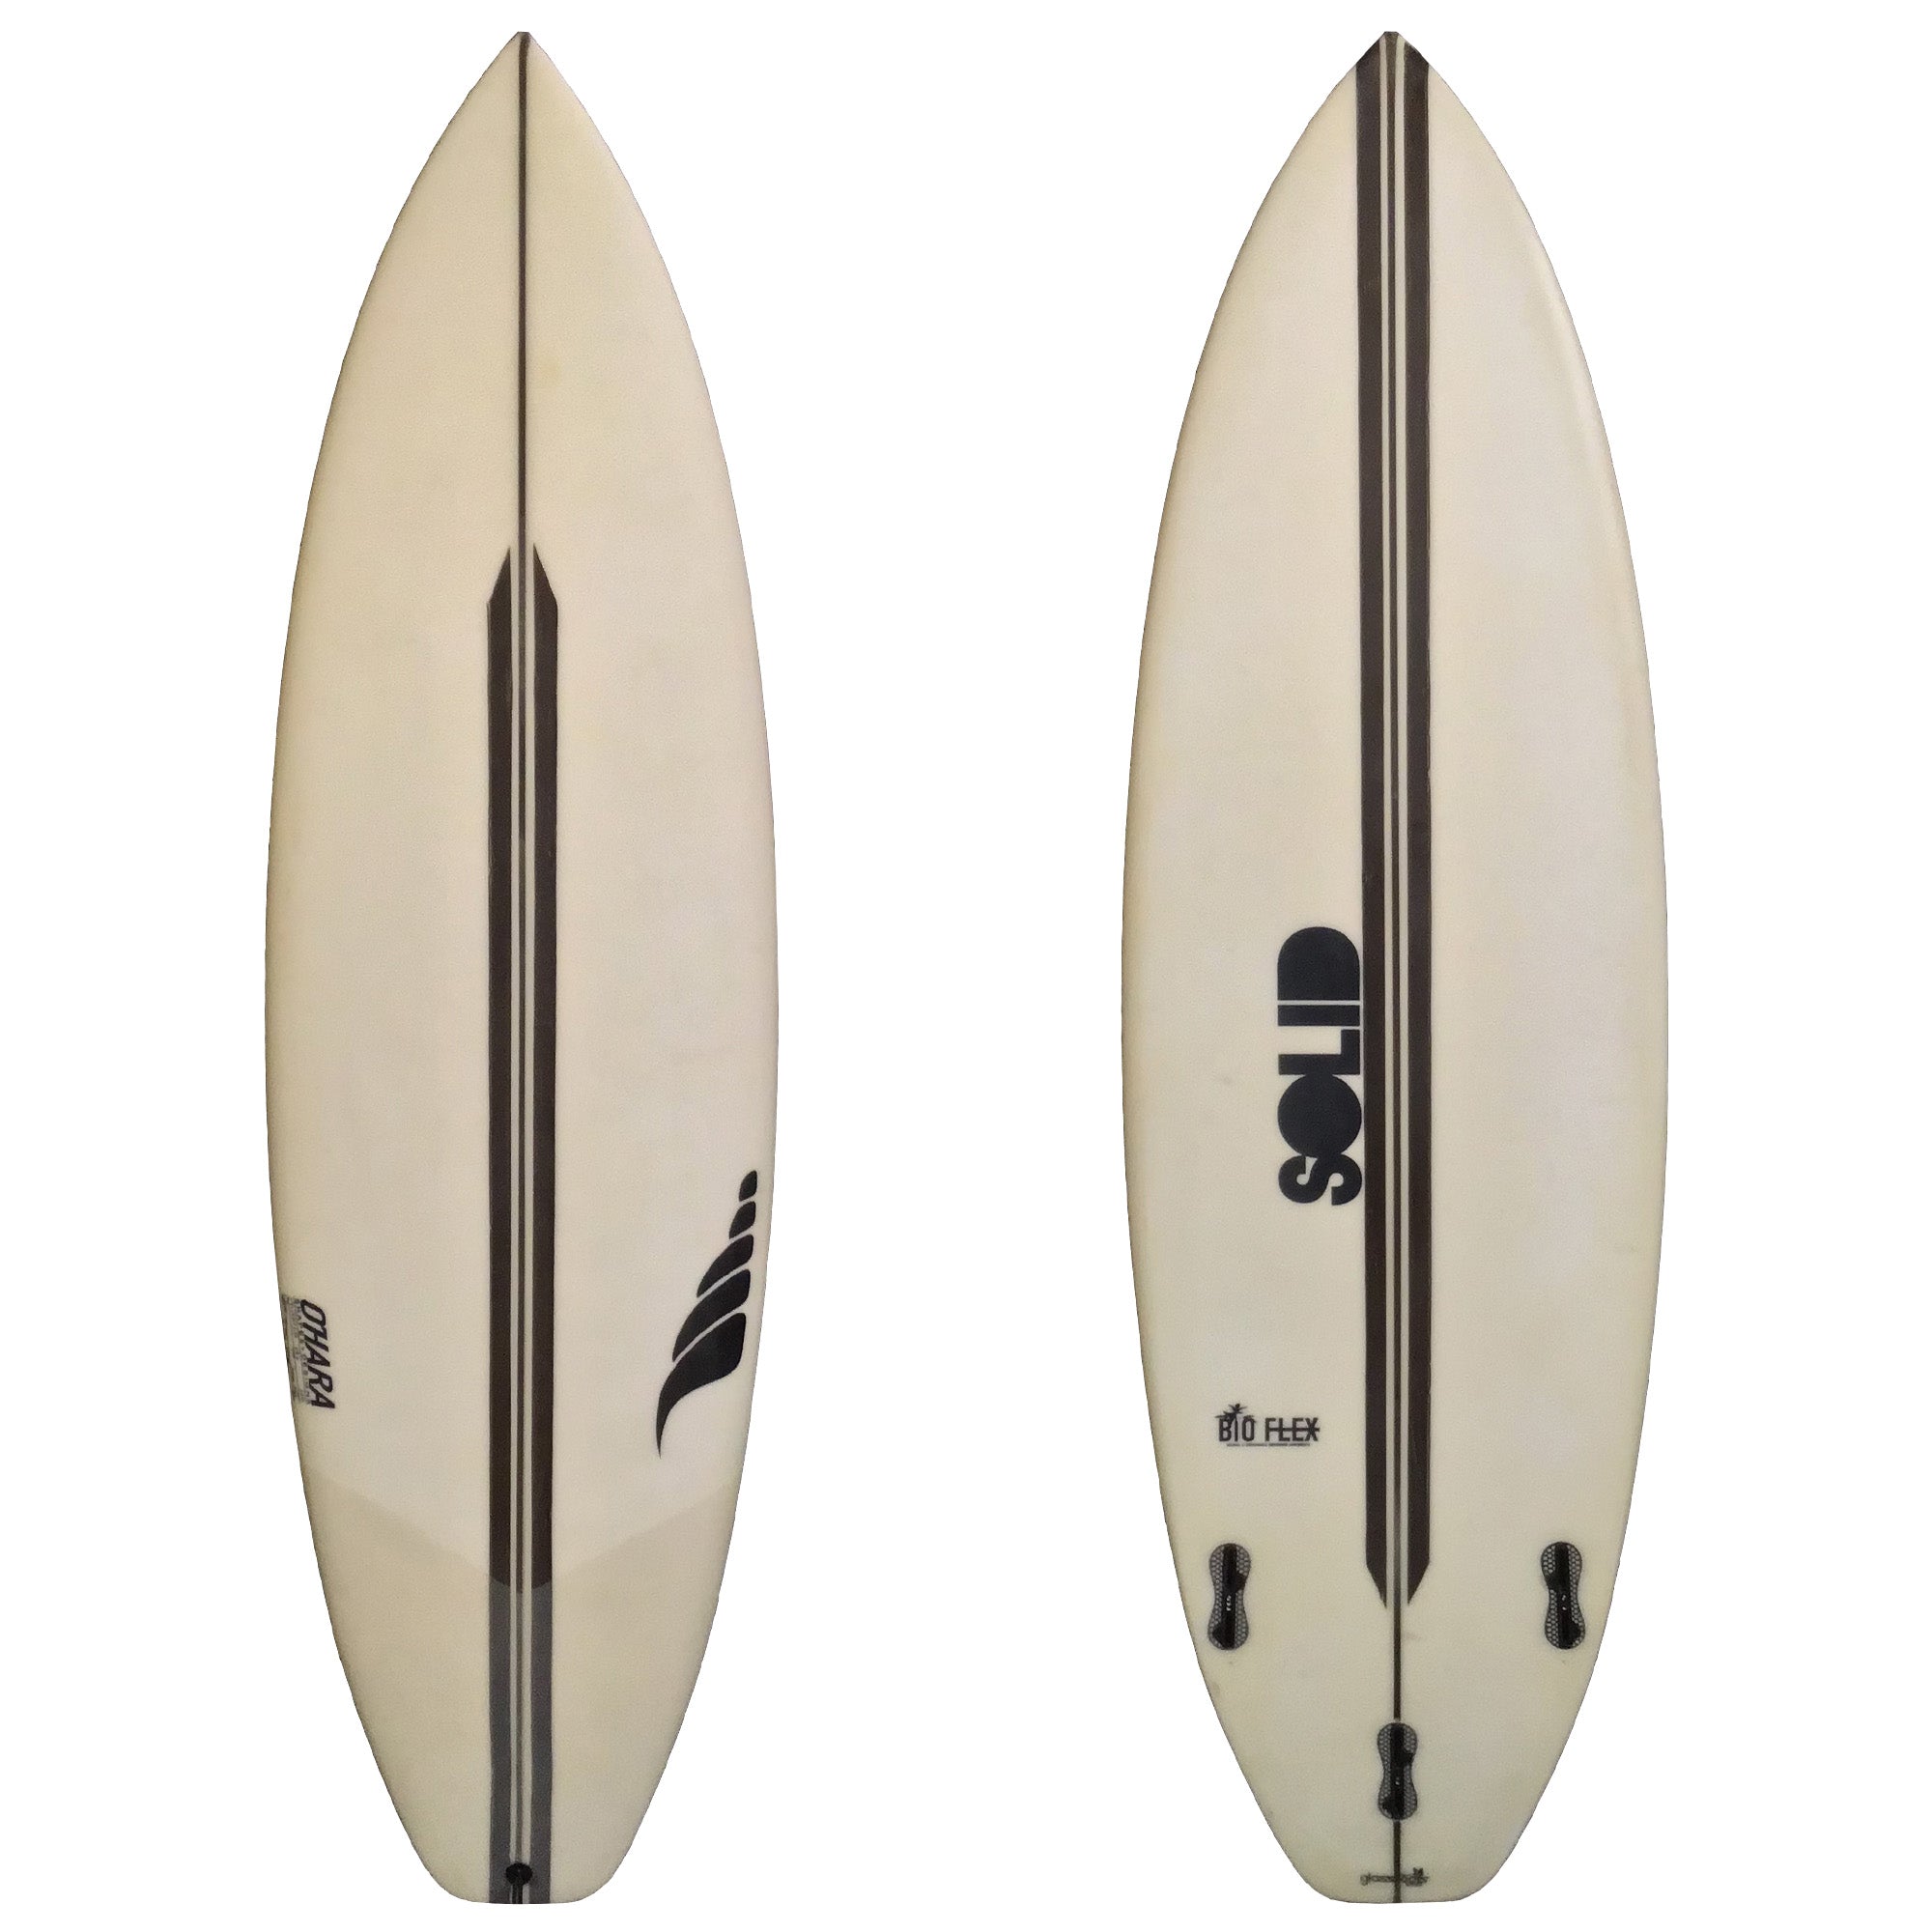 Solid C-Racer 5'8 Consignment Surfboard